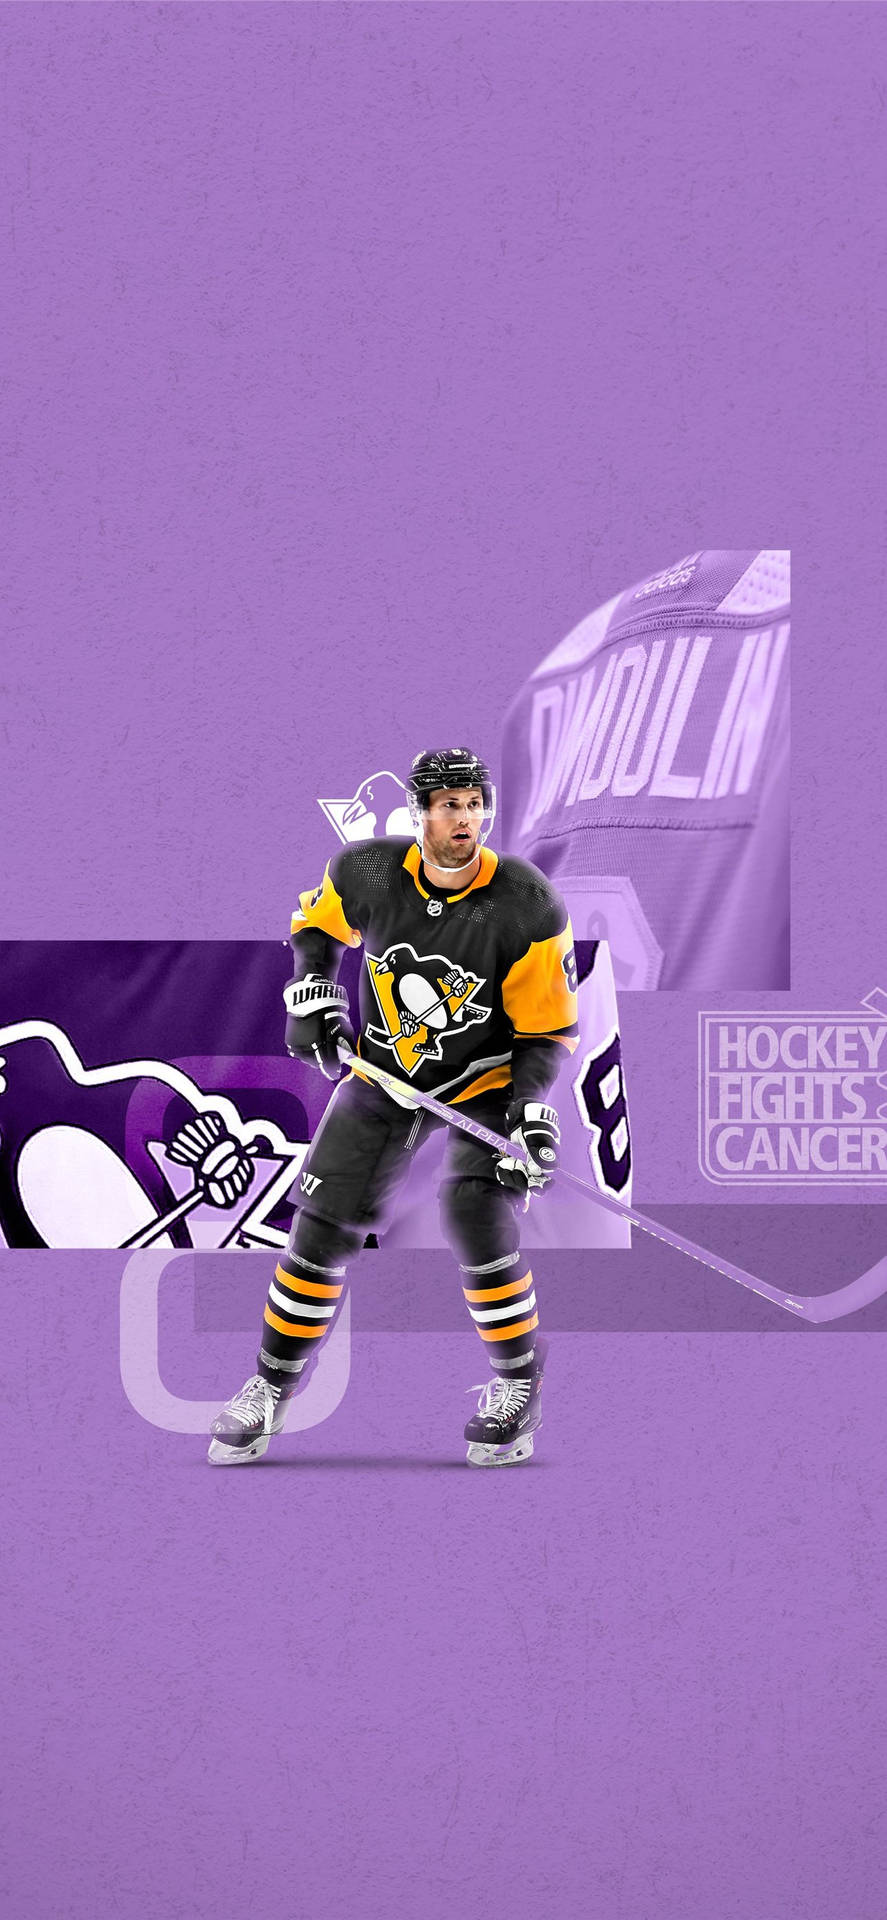 Some Hockey Fights Cancer wallpapers - Colorado Avalanche